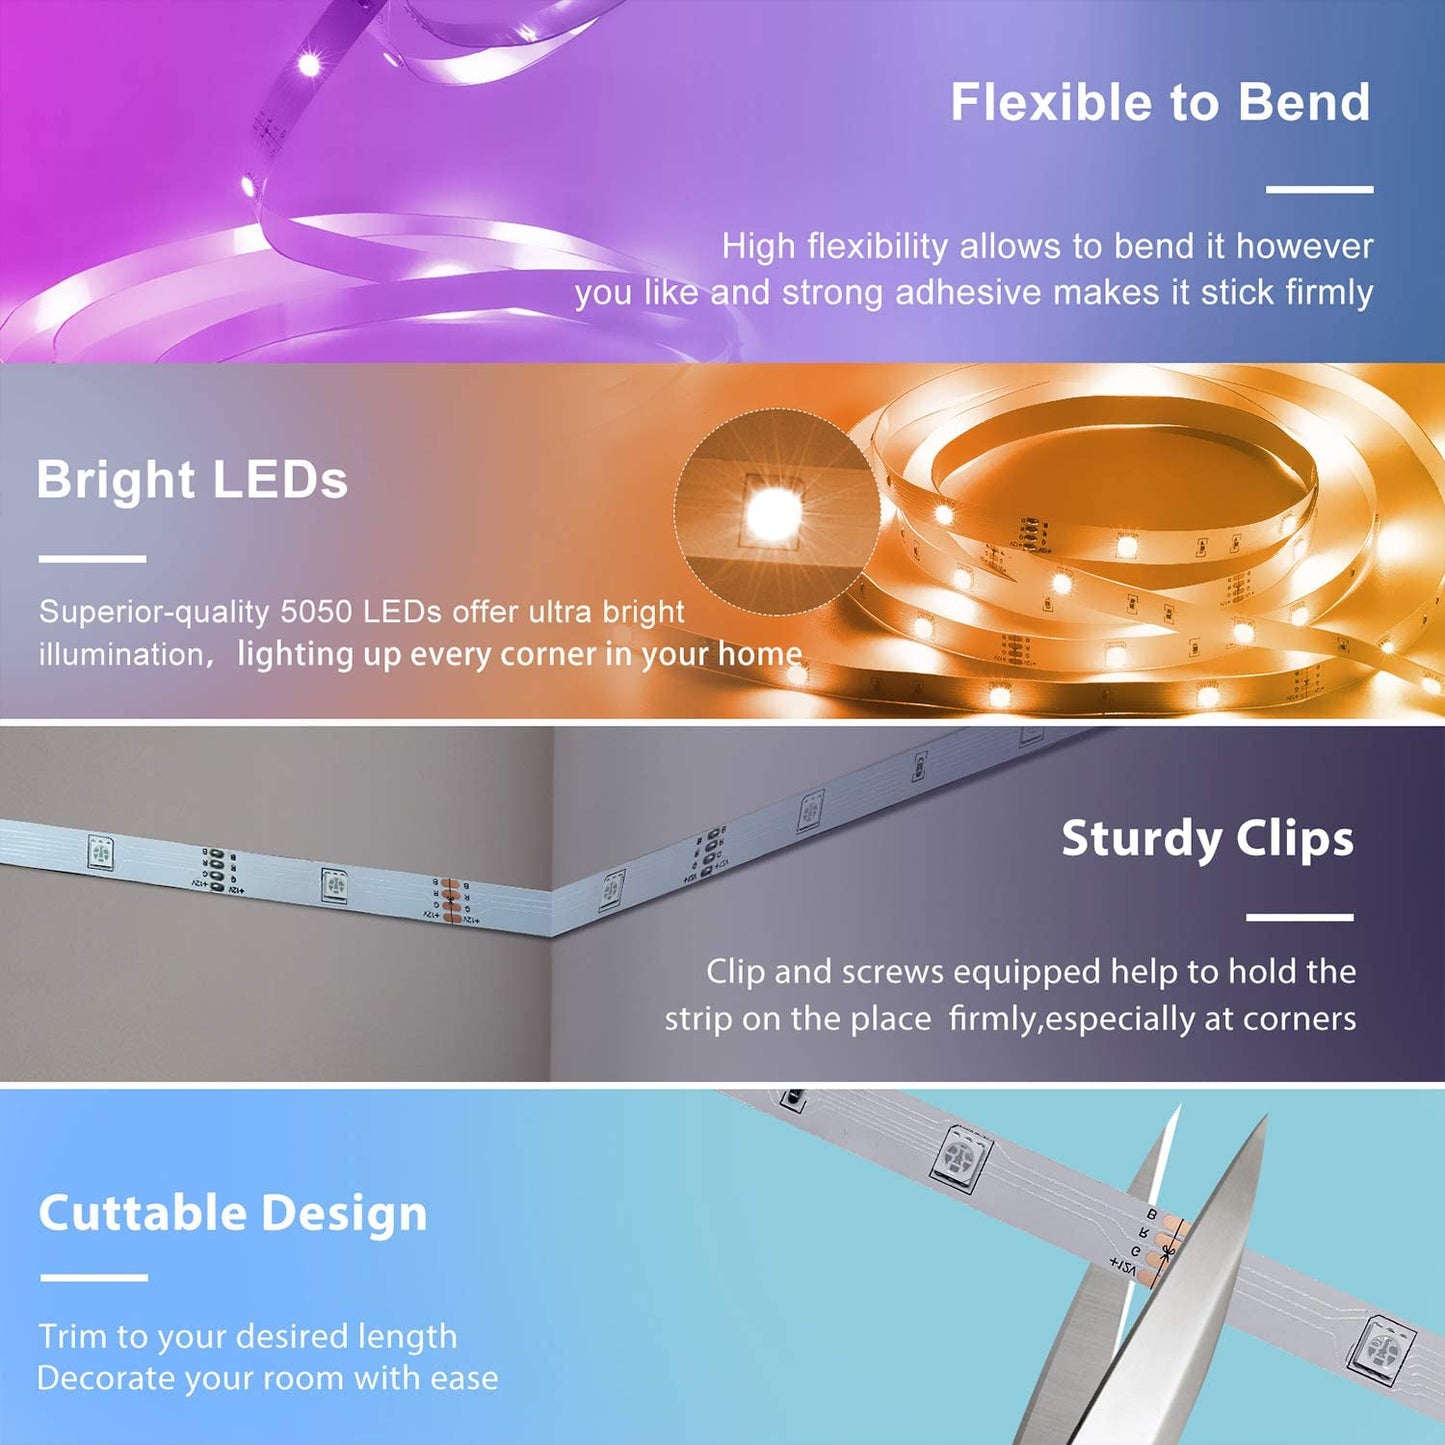 Bluetooth LED strips to light up your room